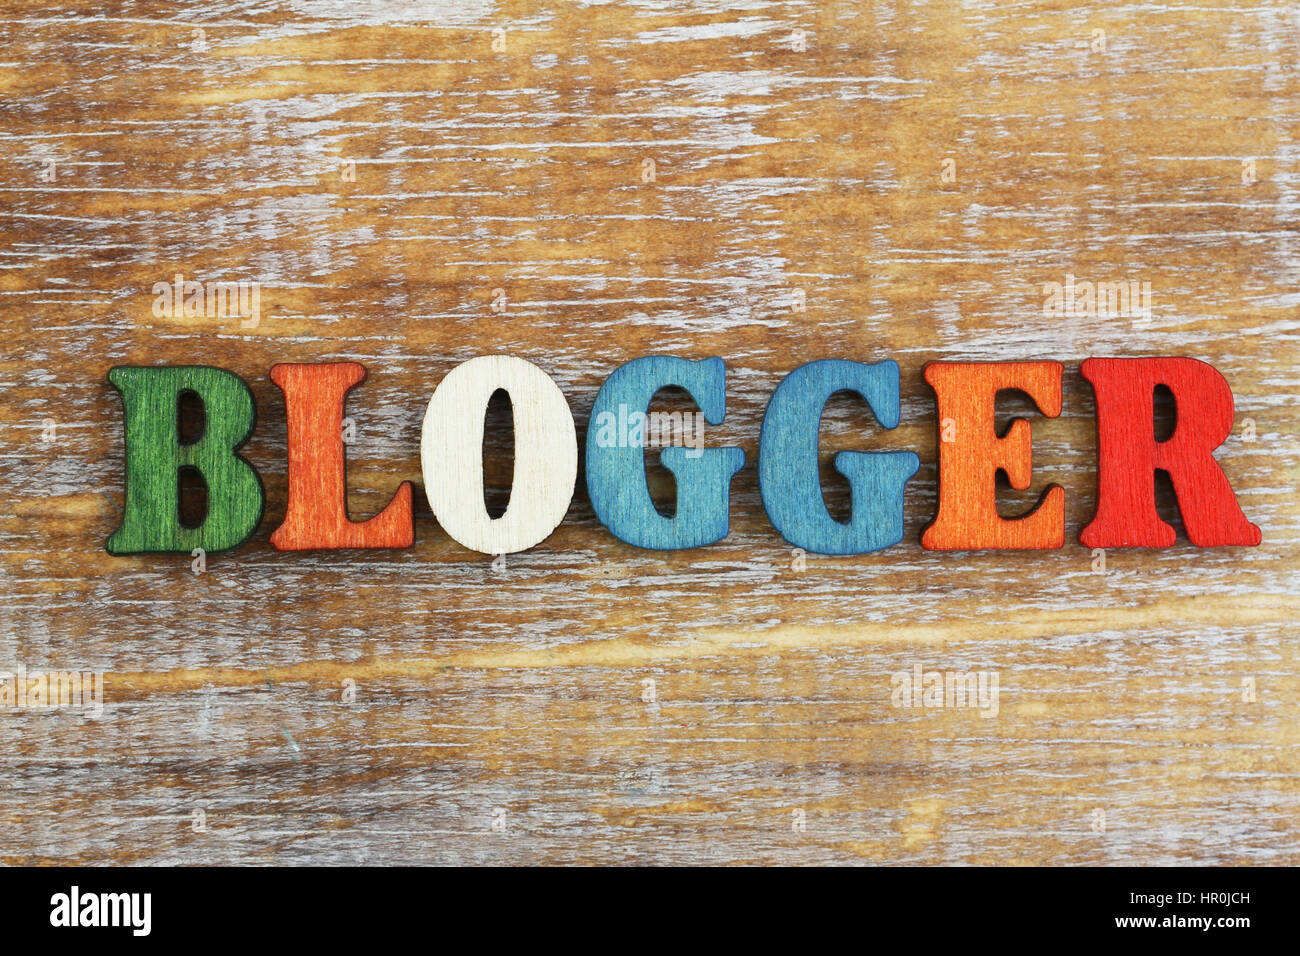 Blogger written with colorful letters on rustic wooden surface Stock Photo